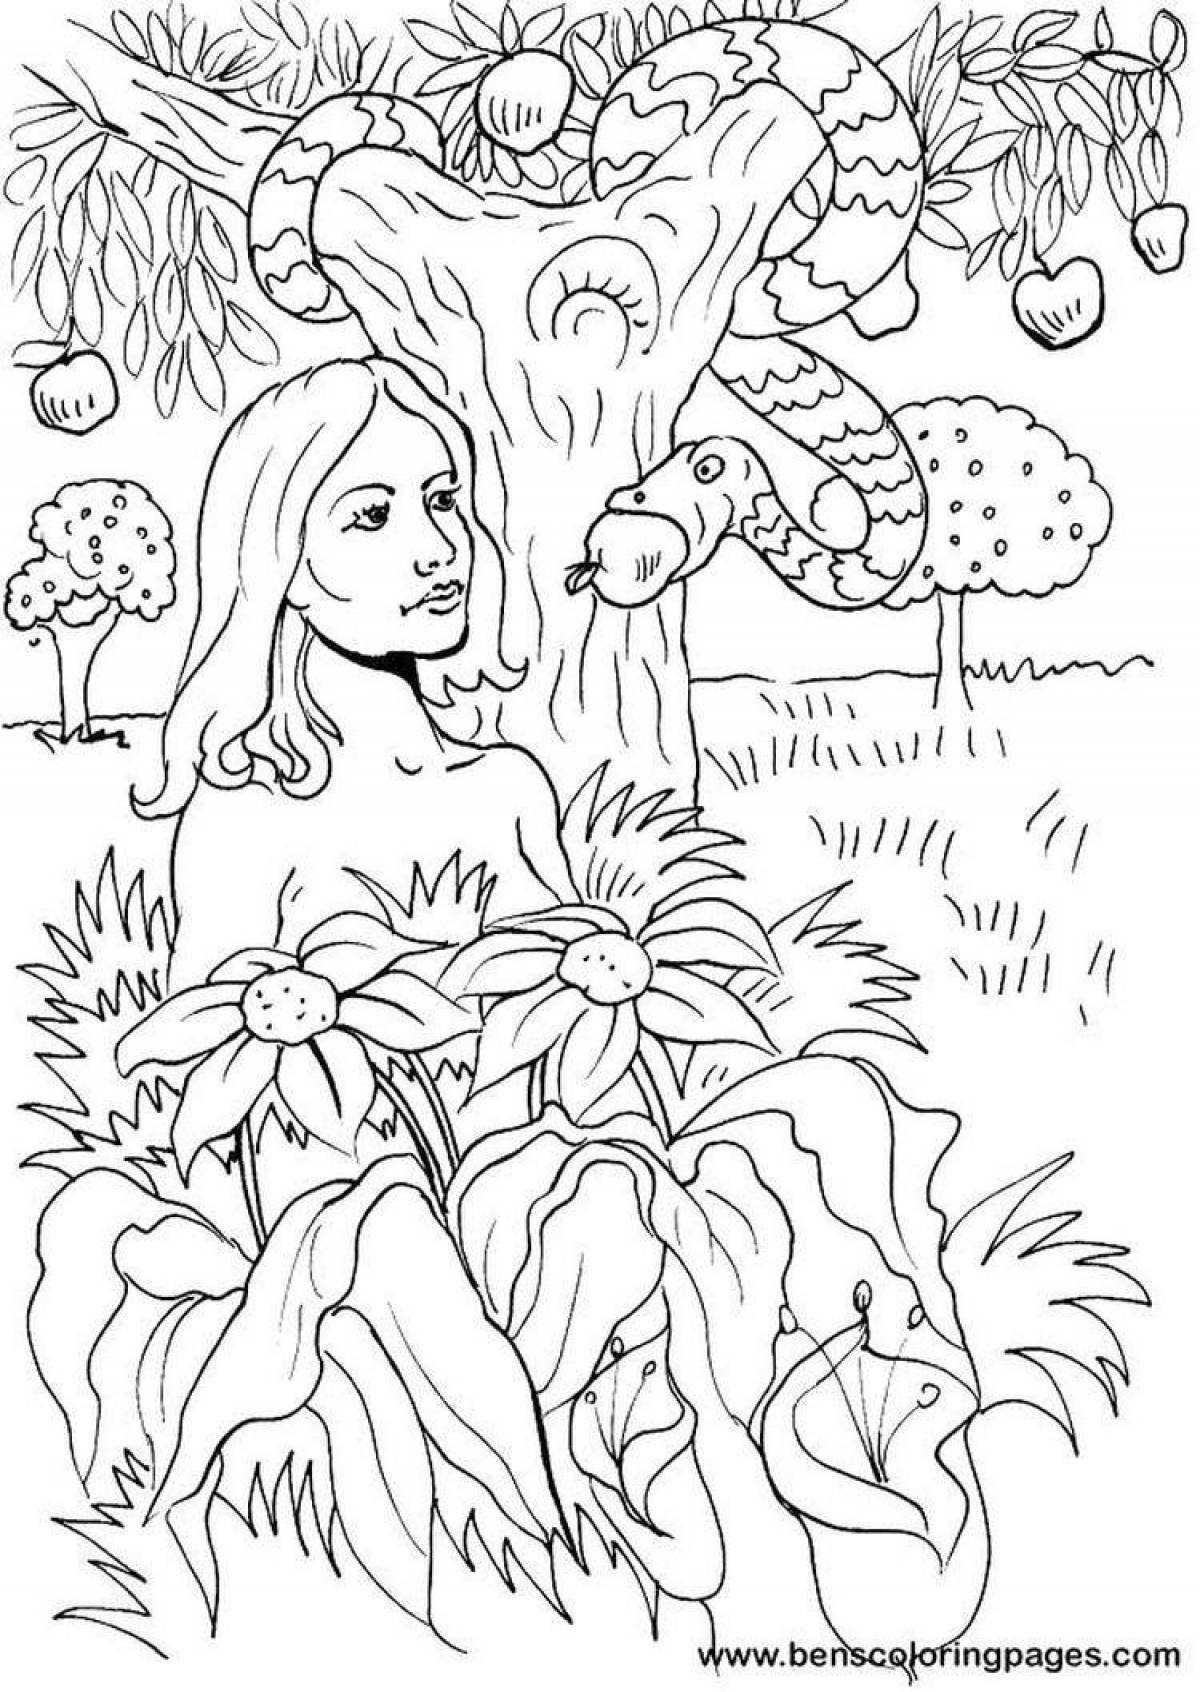 Colouring dazzling adam and eve